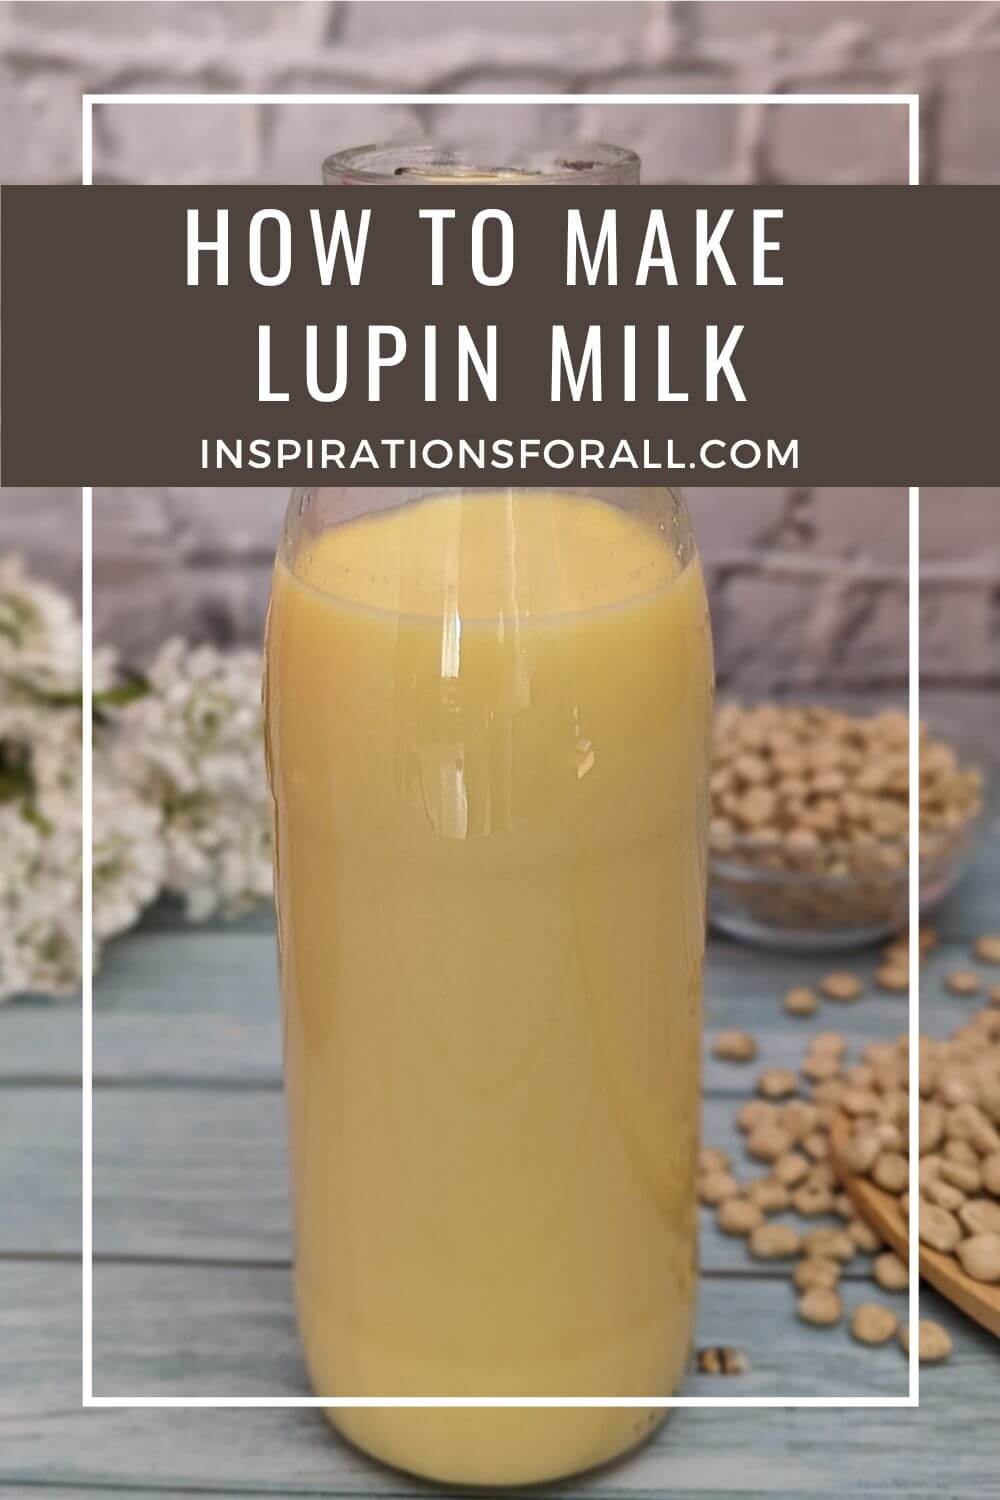 Pin How to make lupin milk